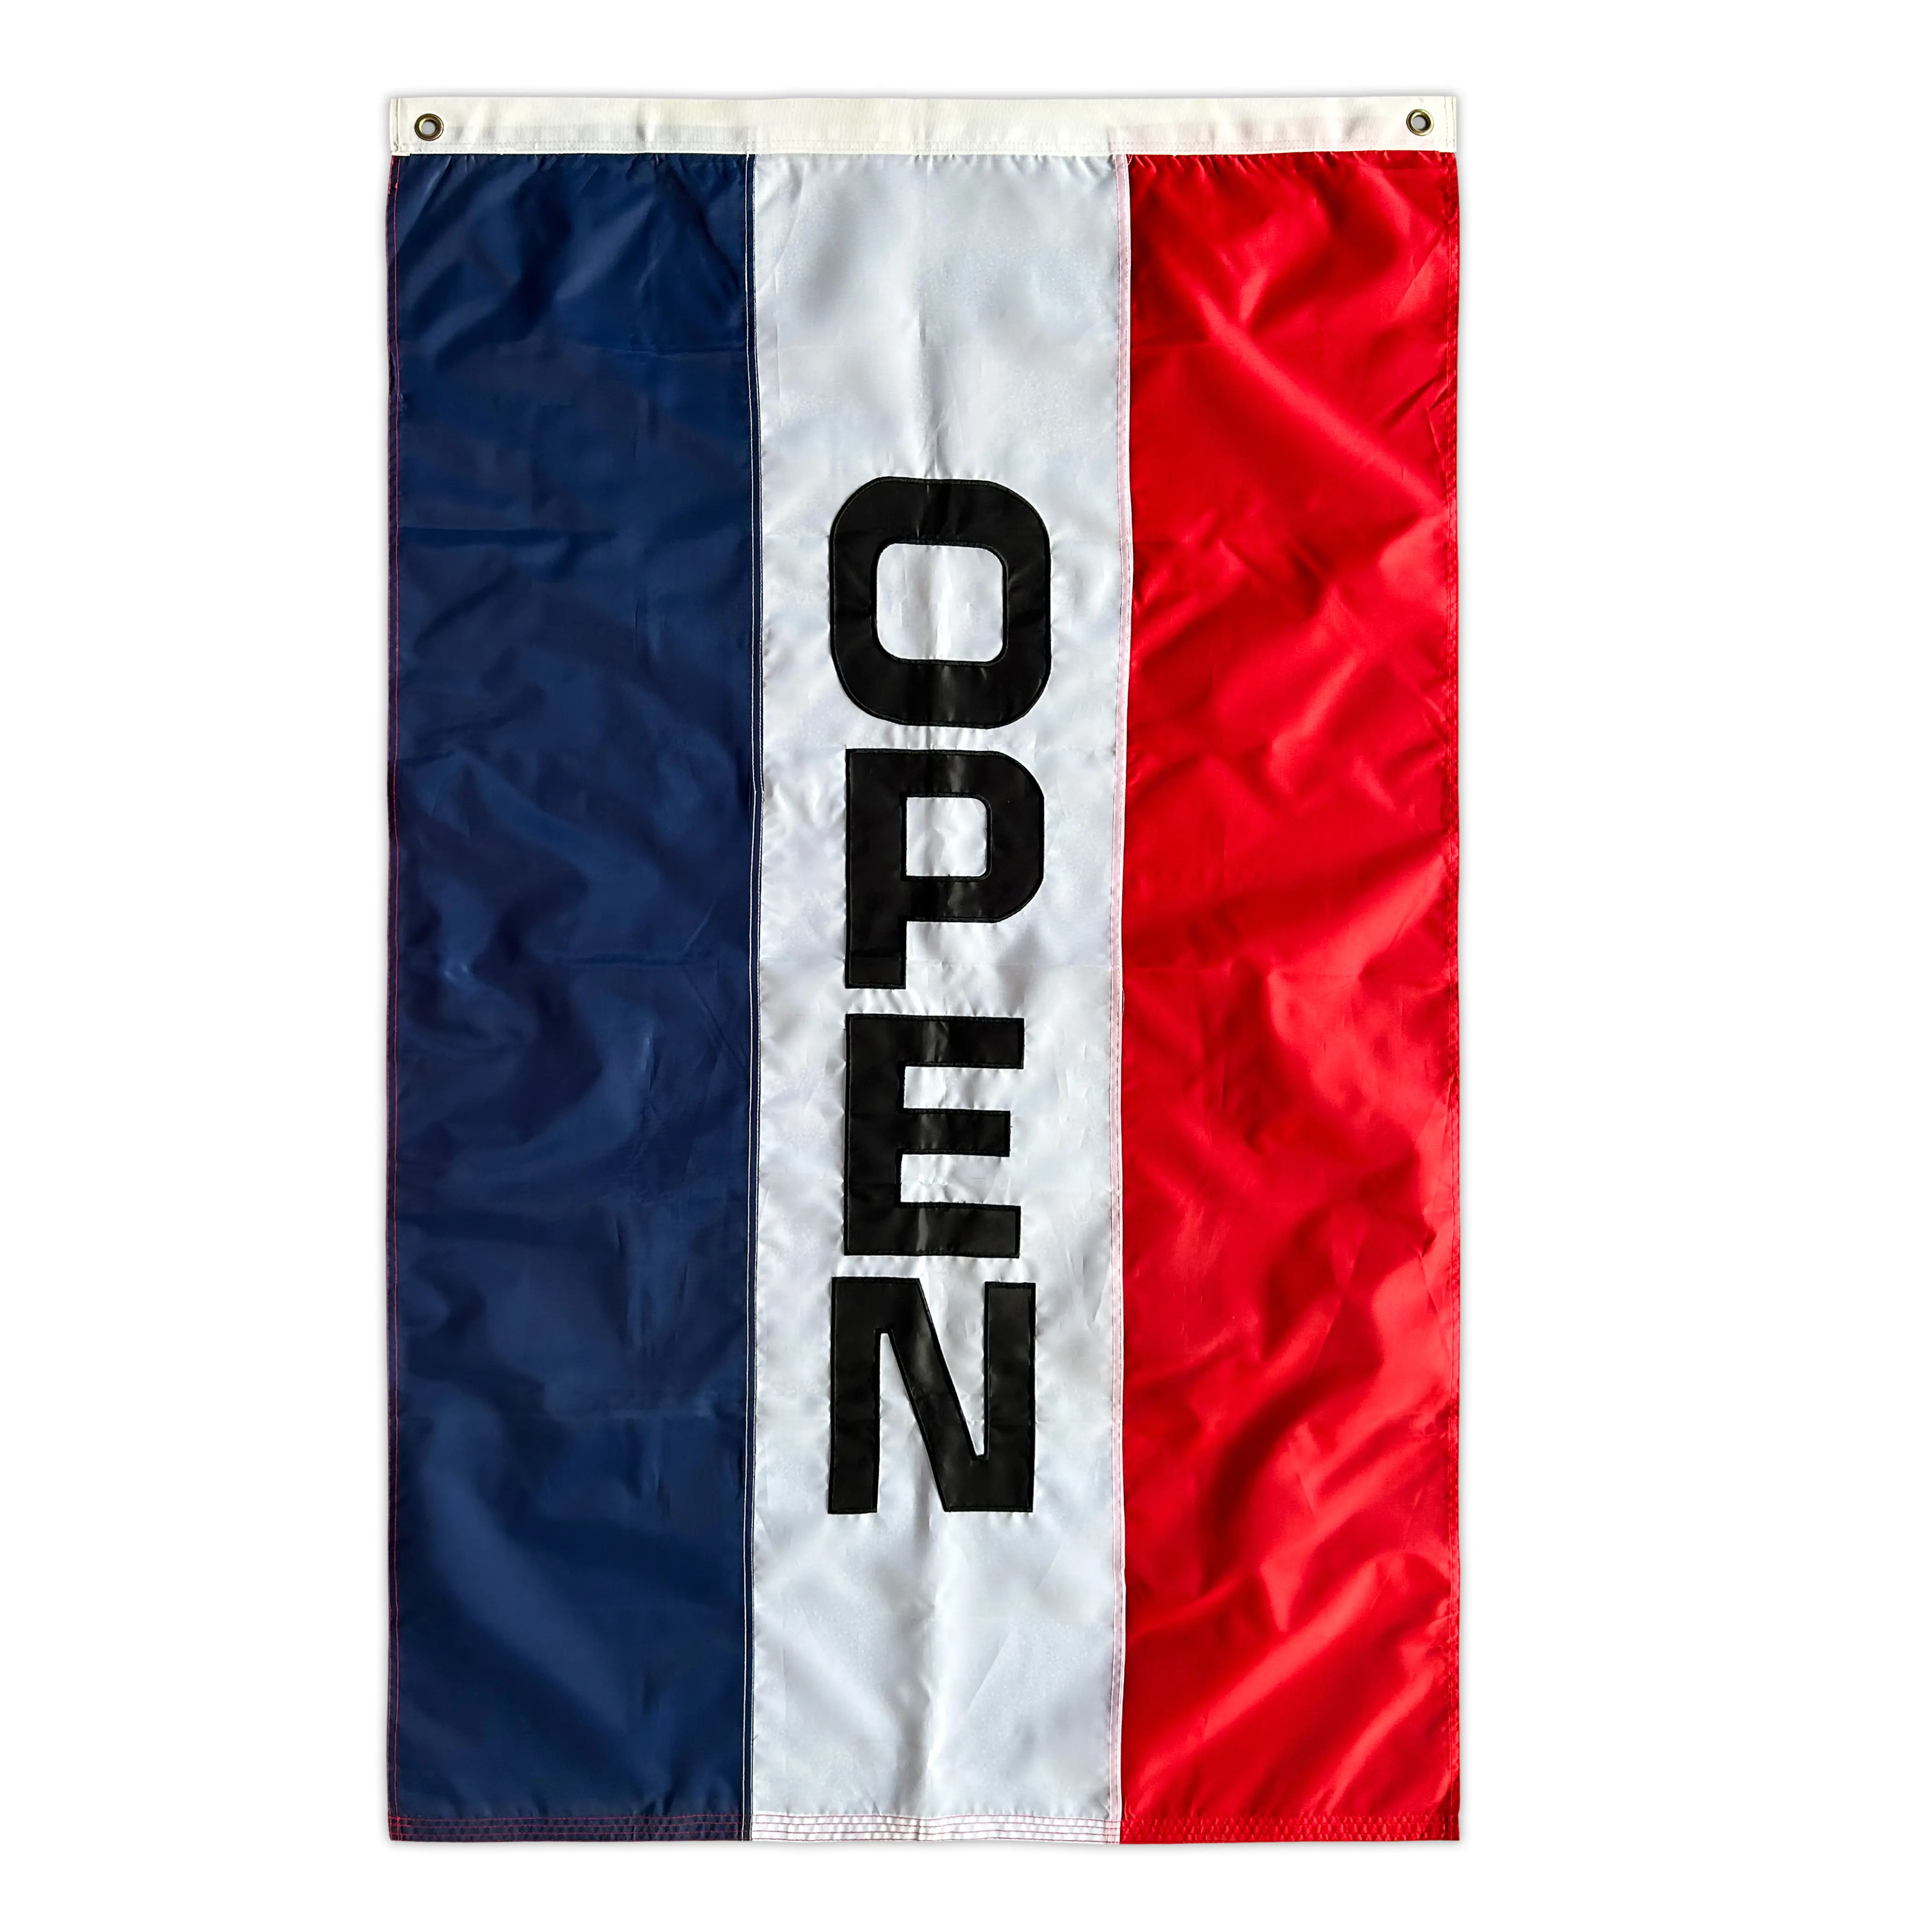 Premium Luxury Embroidery Applique Vertical OPEN Banner Flag with Brass Grommets at Top 4 Stitching at Flying Hem OPEN Sign